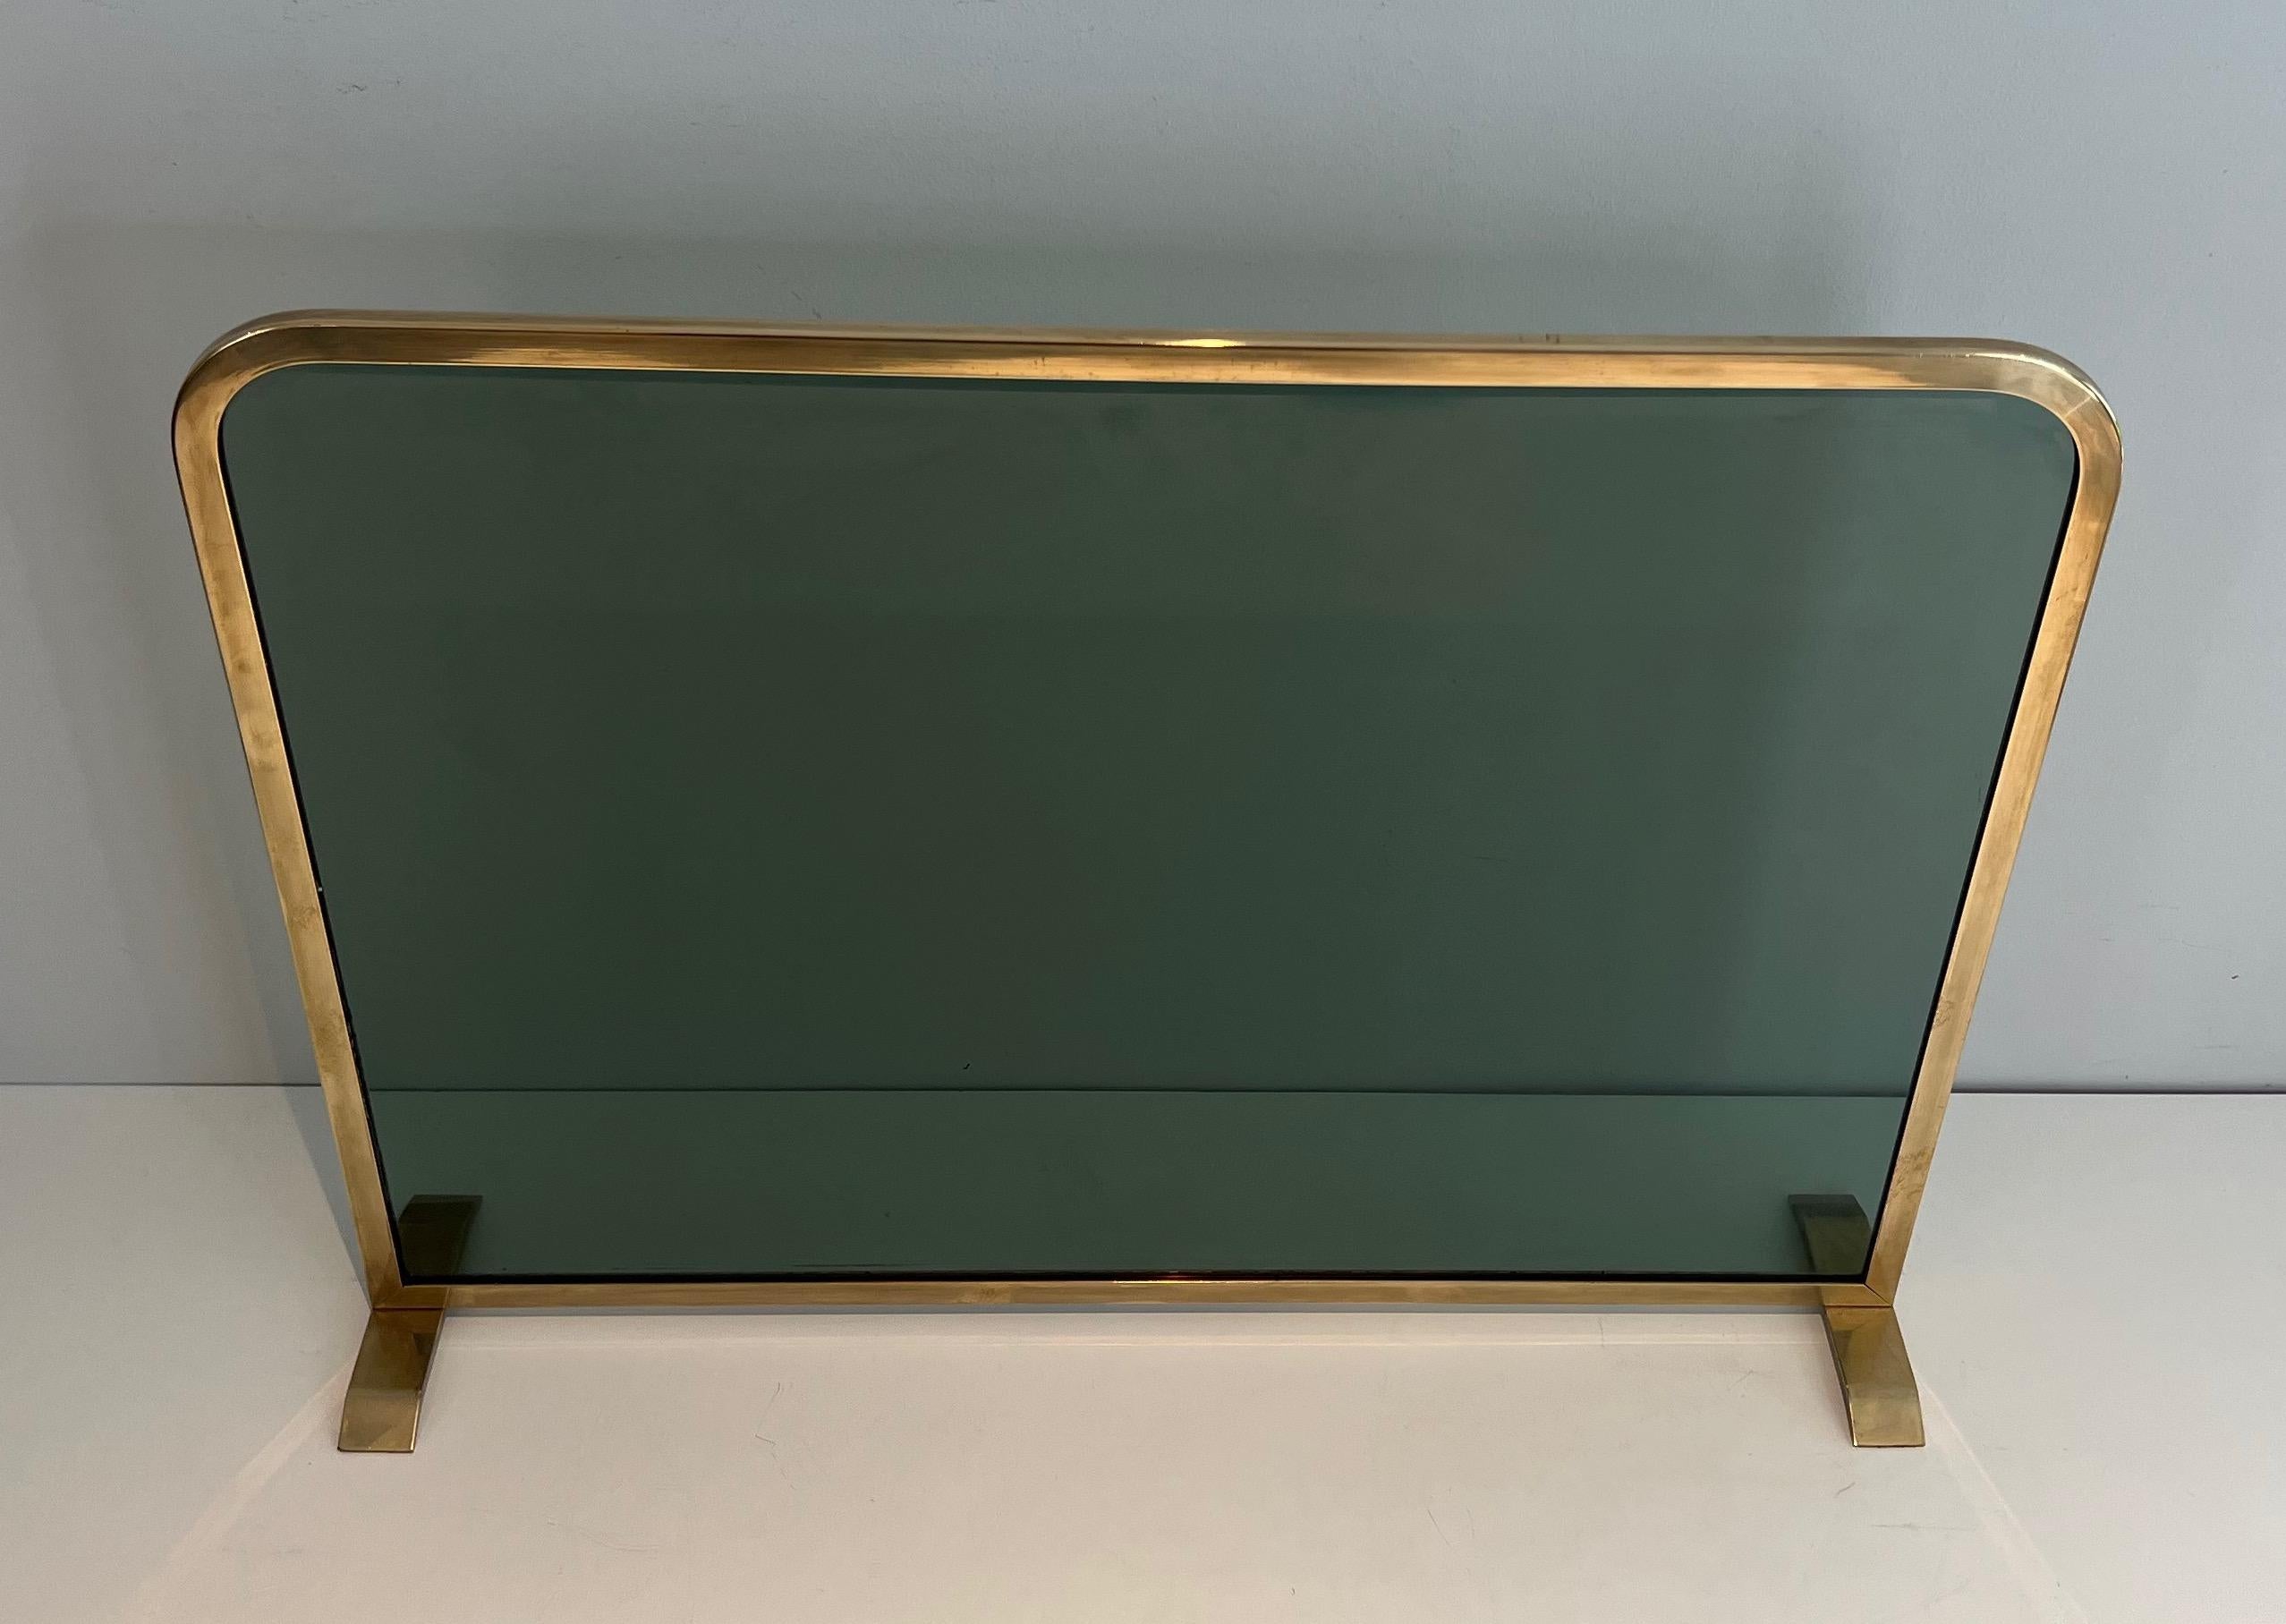 This very nice and elegant fireplace screen is made of a greenish glass panel surrounded by a brass frame. This is a French work. Circa 1970